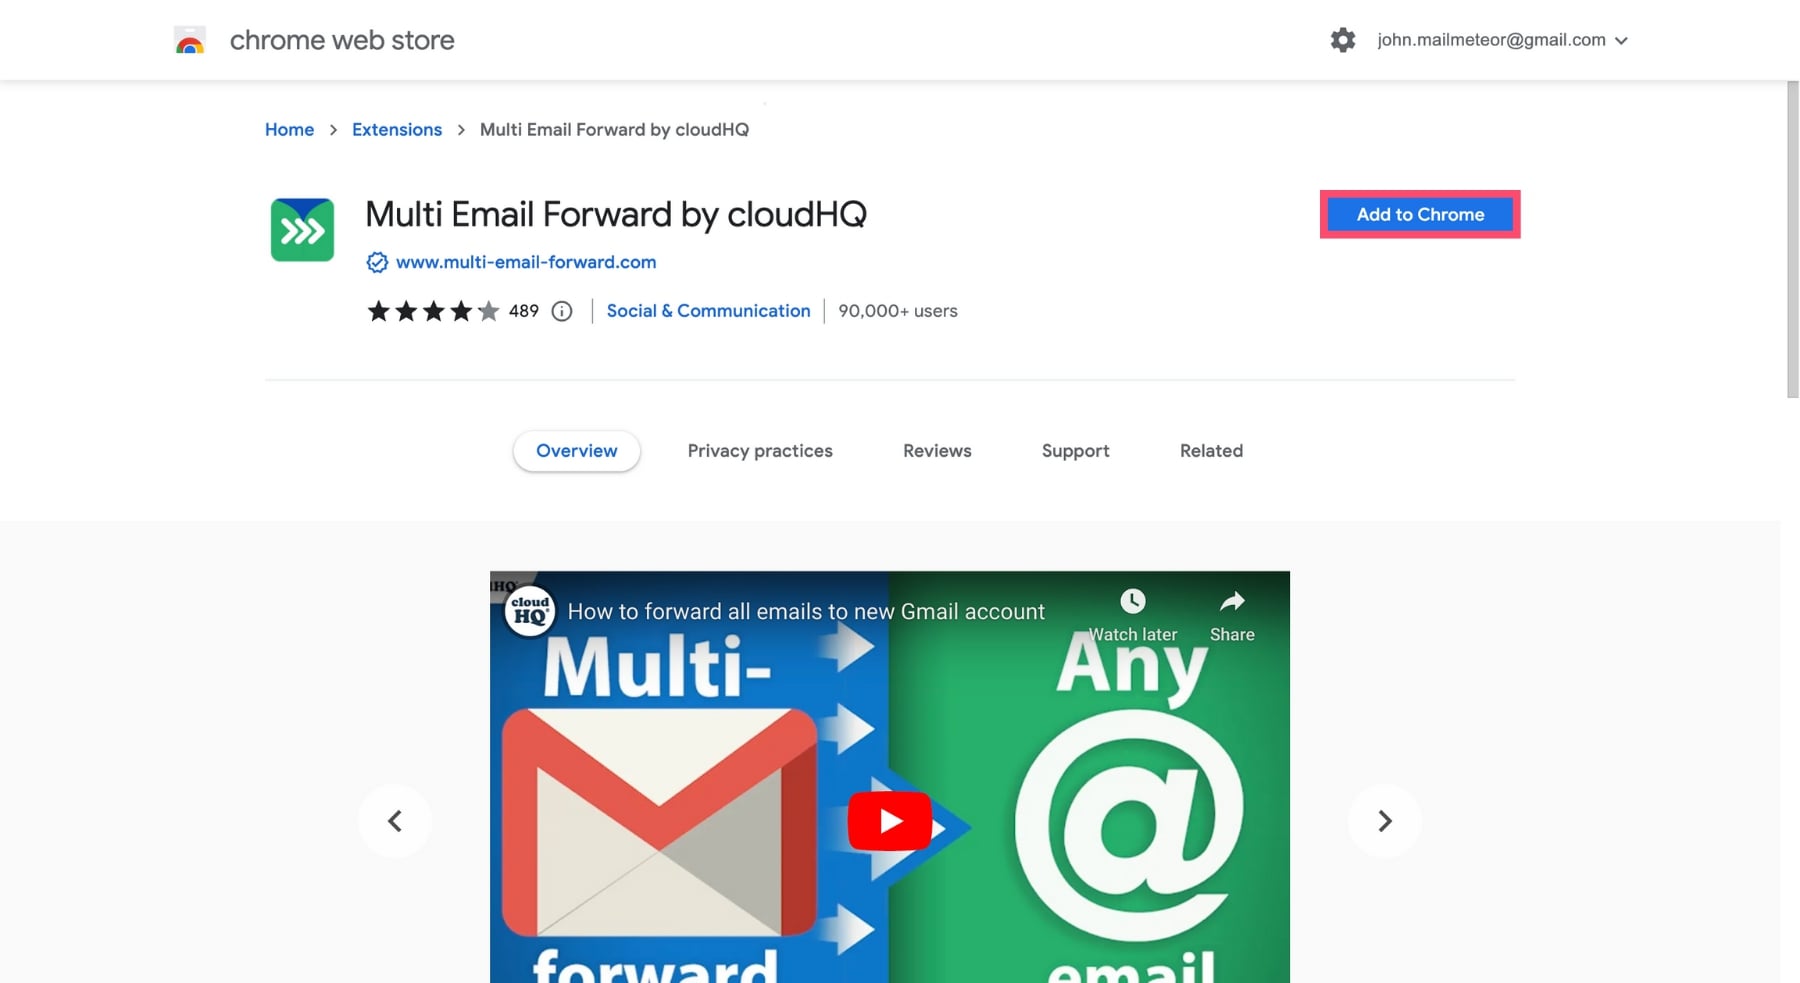 Install the Multi Email Forward Chrome extension